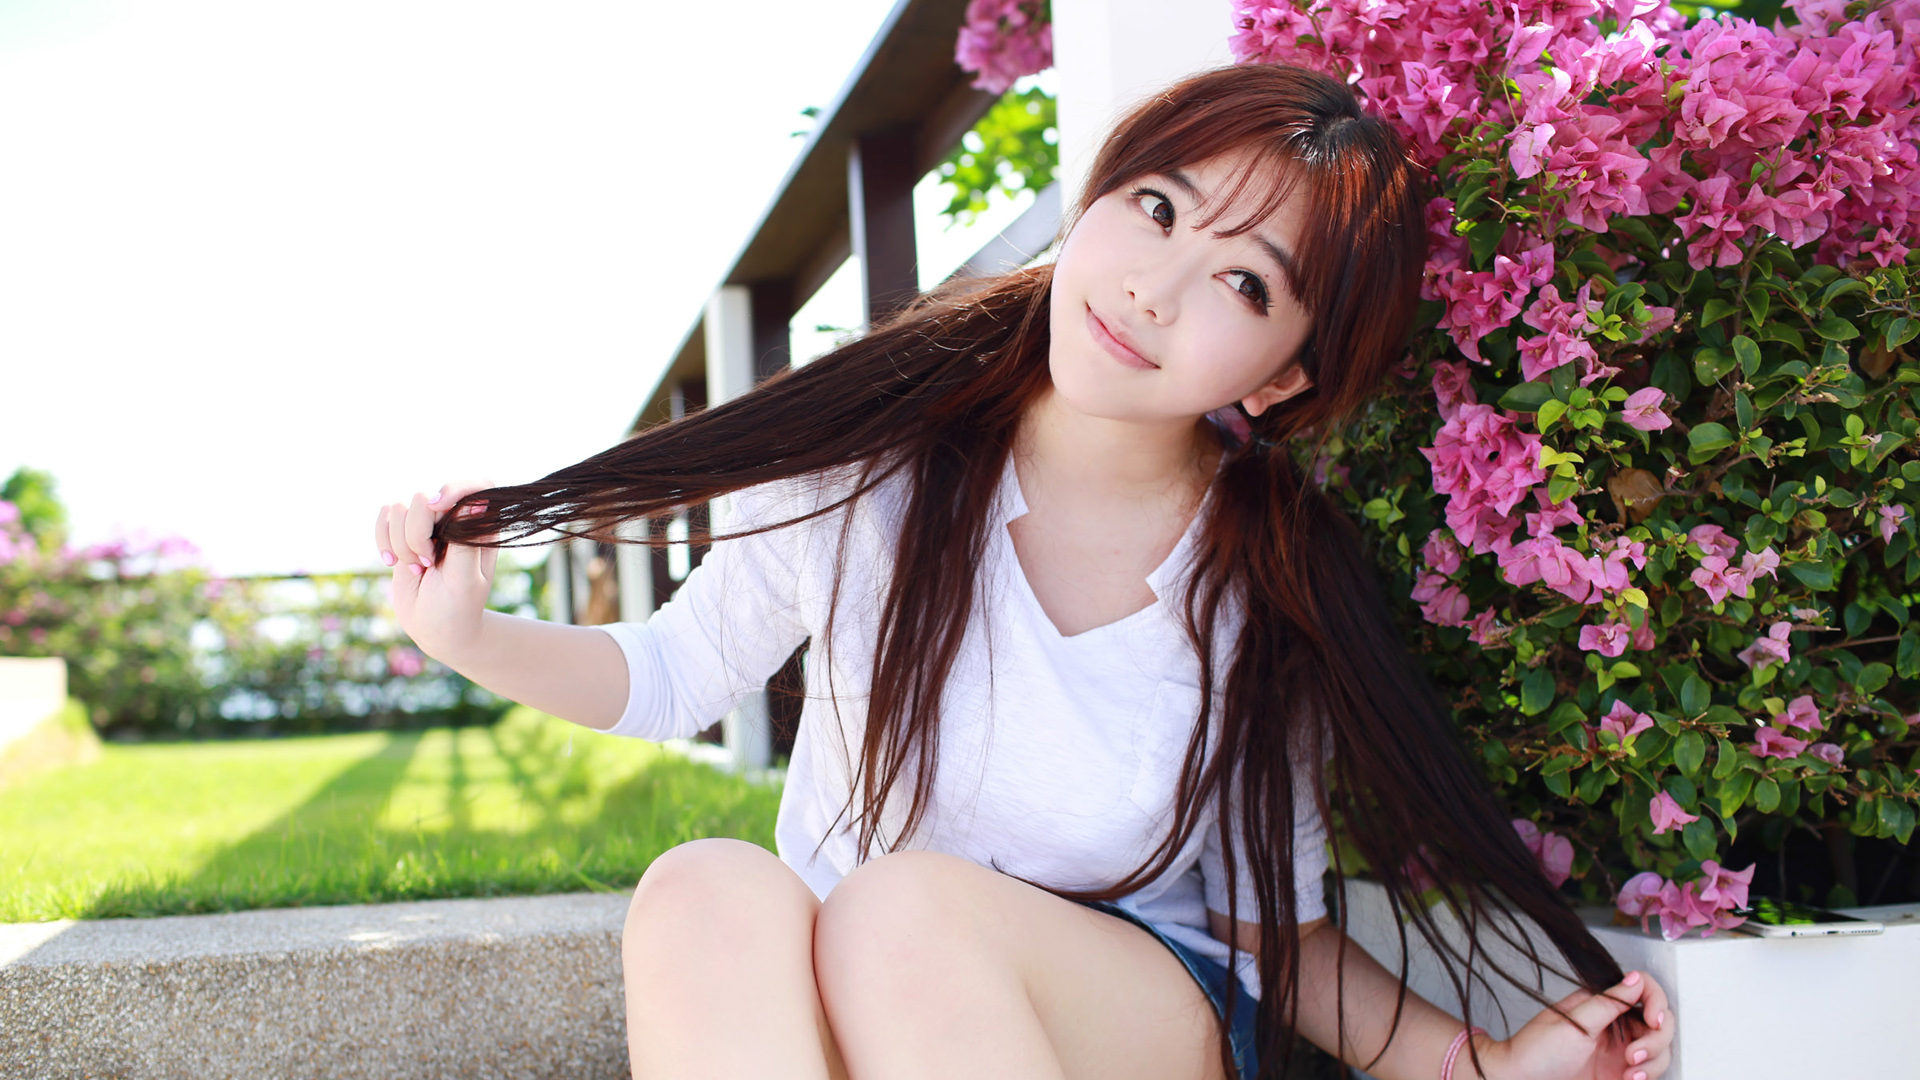 Asian Women Model Pigtails Brunette Women Outdoors White Blouse Hair Pulling Smiling Looking Away 1920x1080